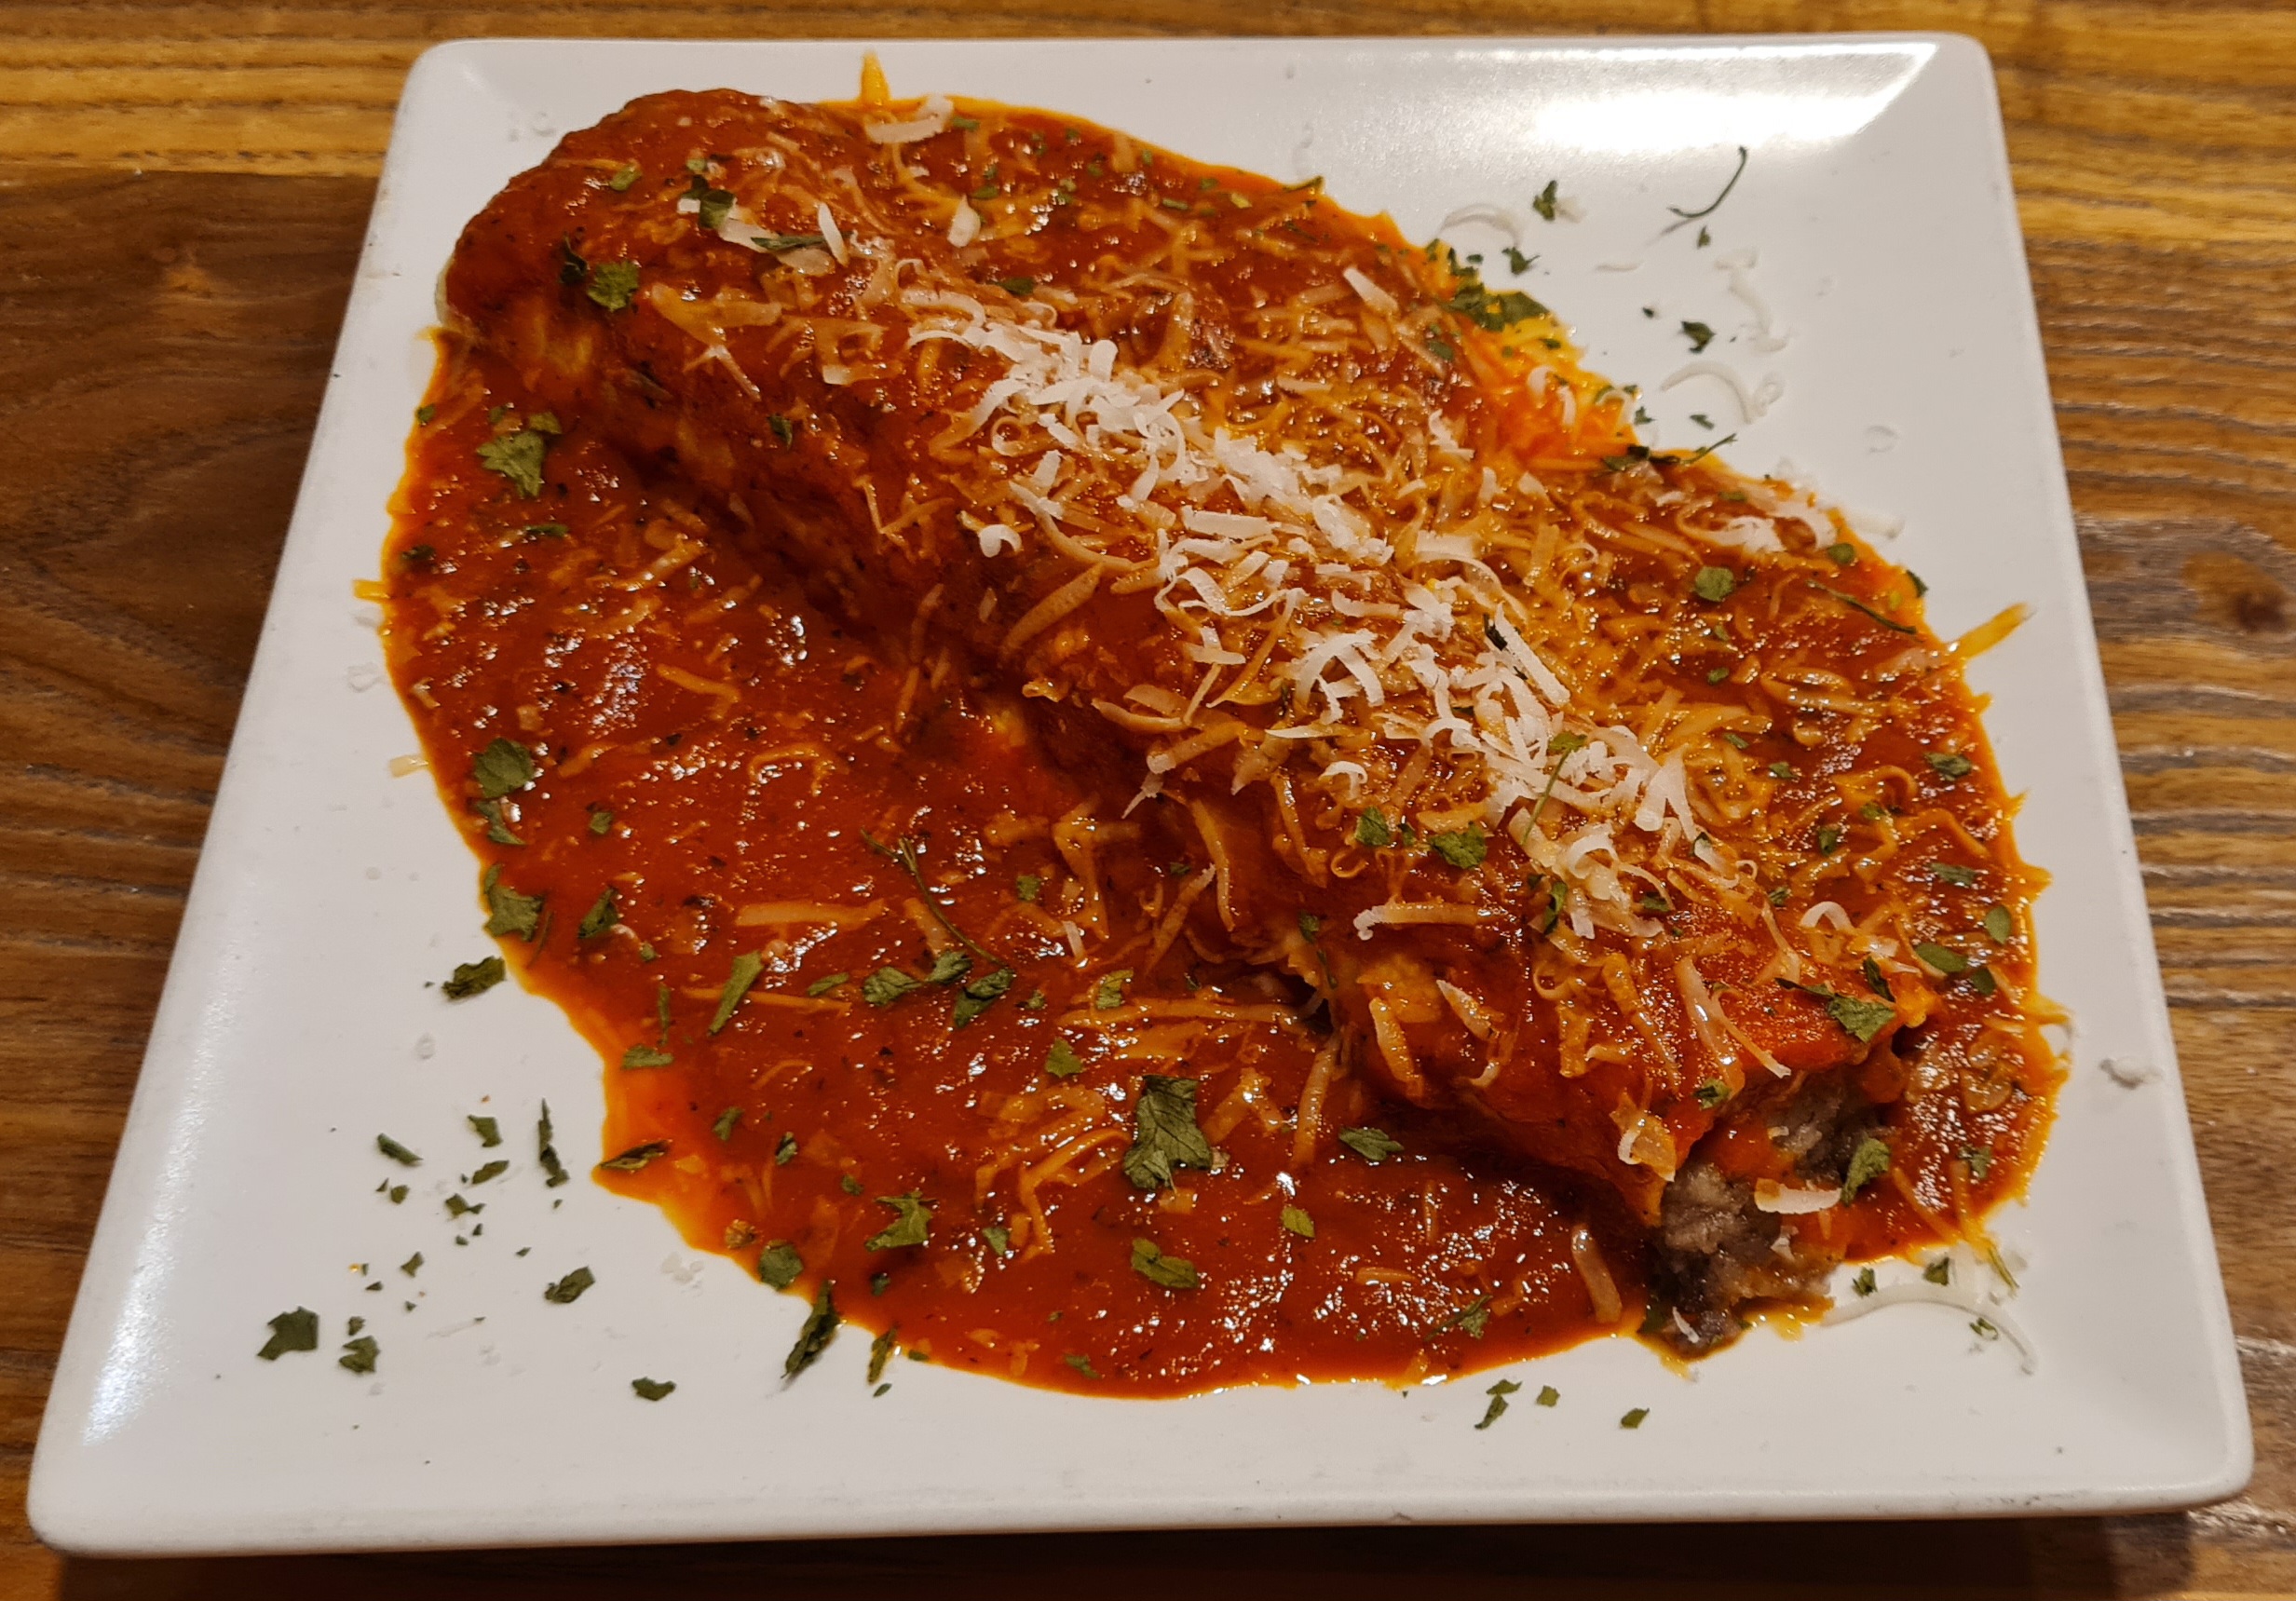 Cannelloni stuffed with roast beef with homemade tomato and basil sauce and parmesan cheese